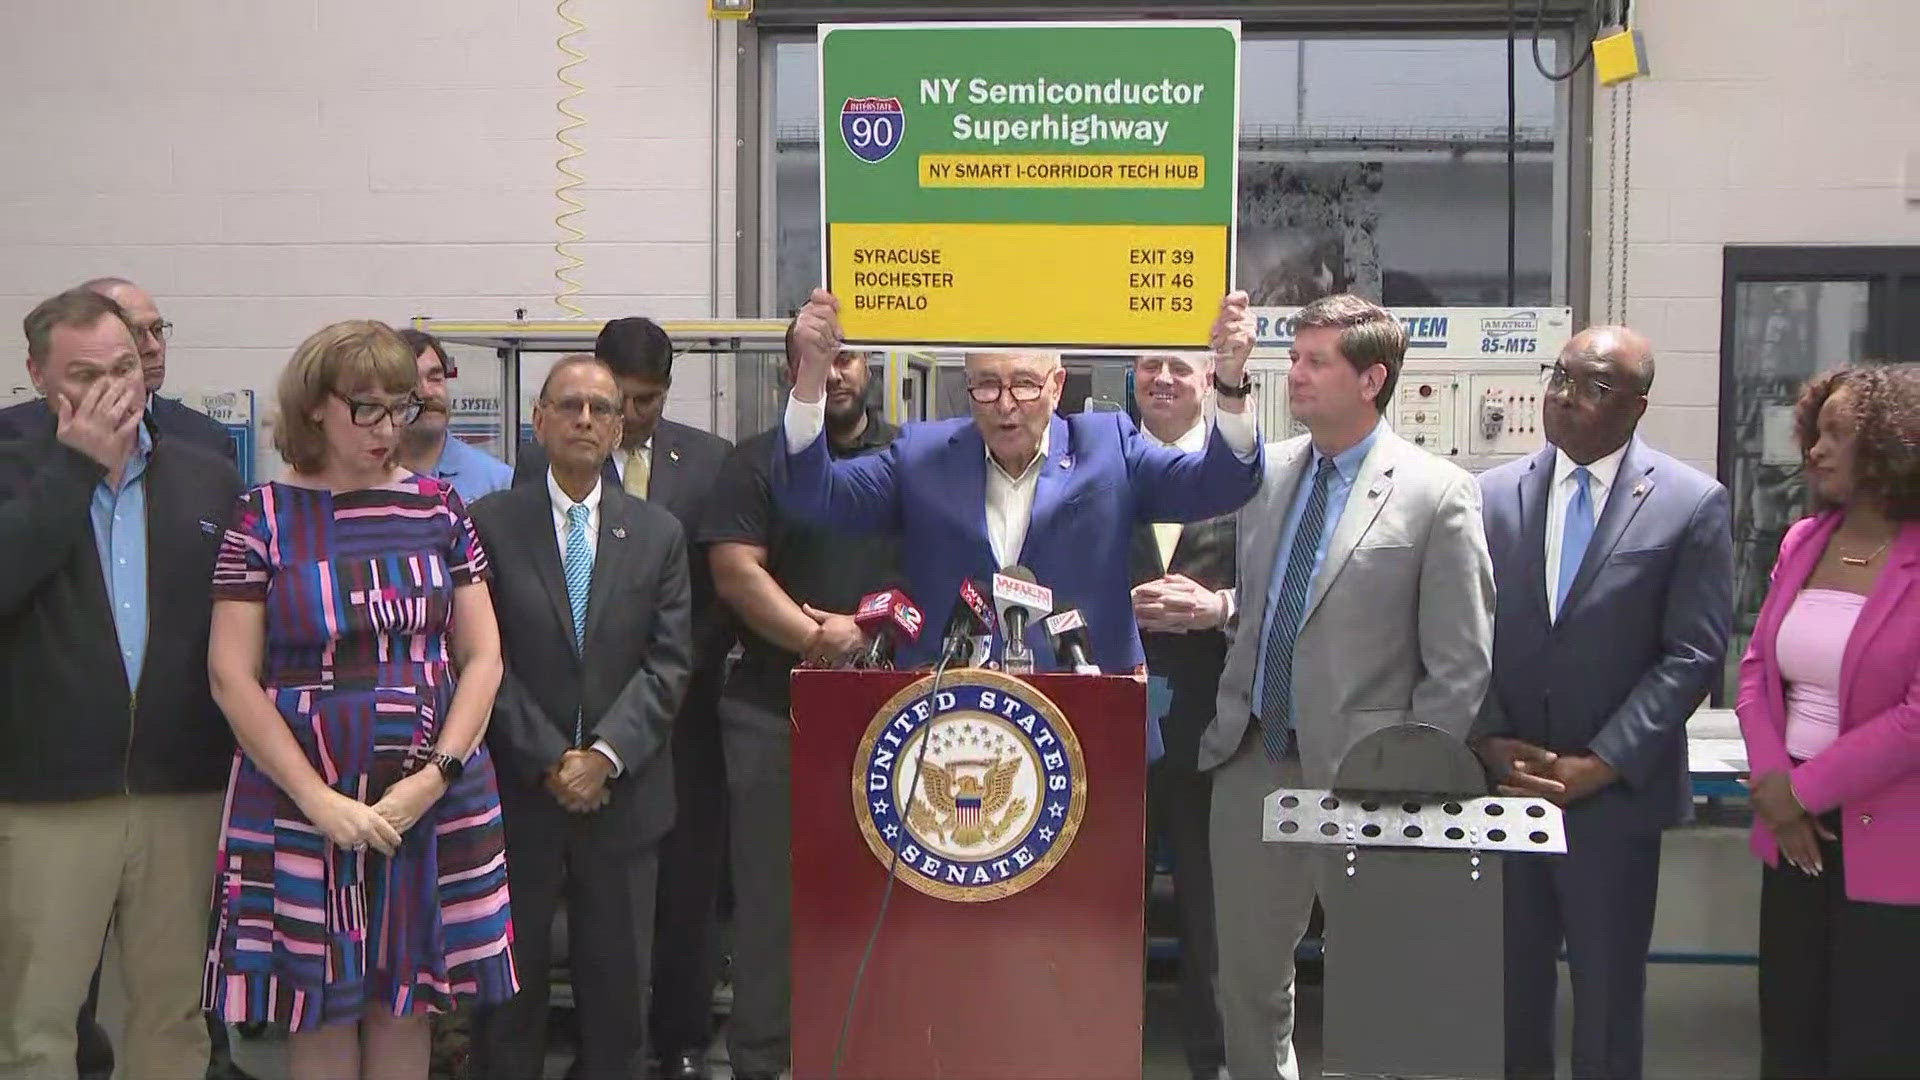 Schumer and other NYS officials talk about superhighway and semiconductor